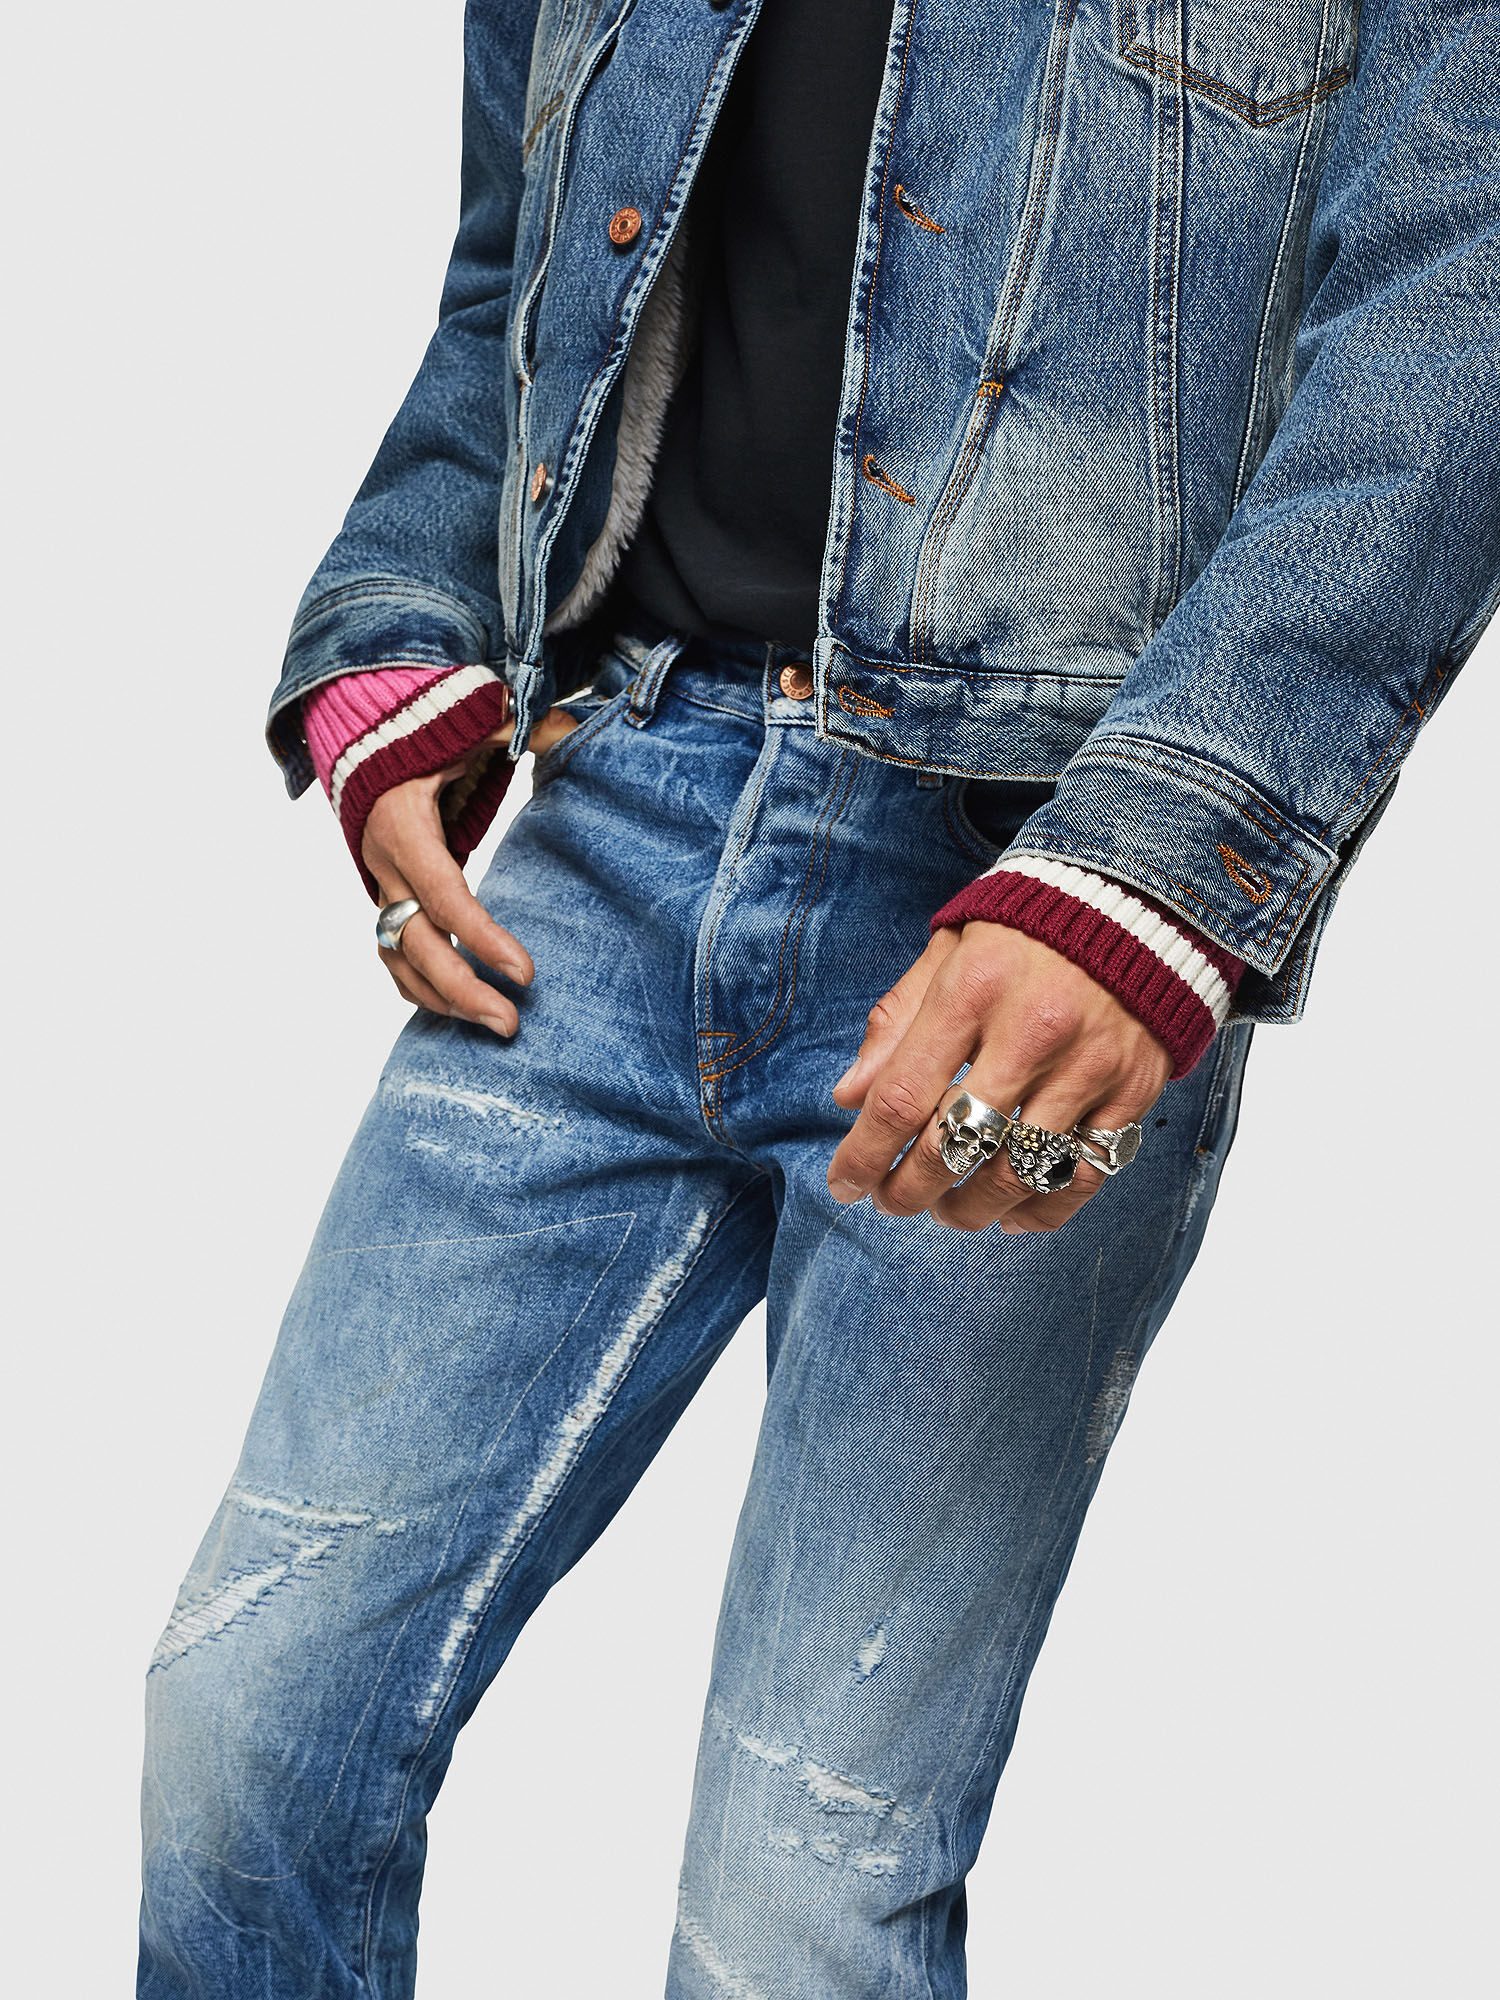 Ripped Designs Denim Patches Tools and Wood Grain Peekaboo Iron on